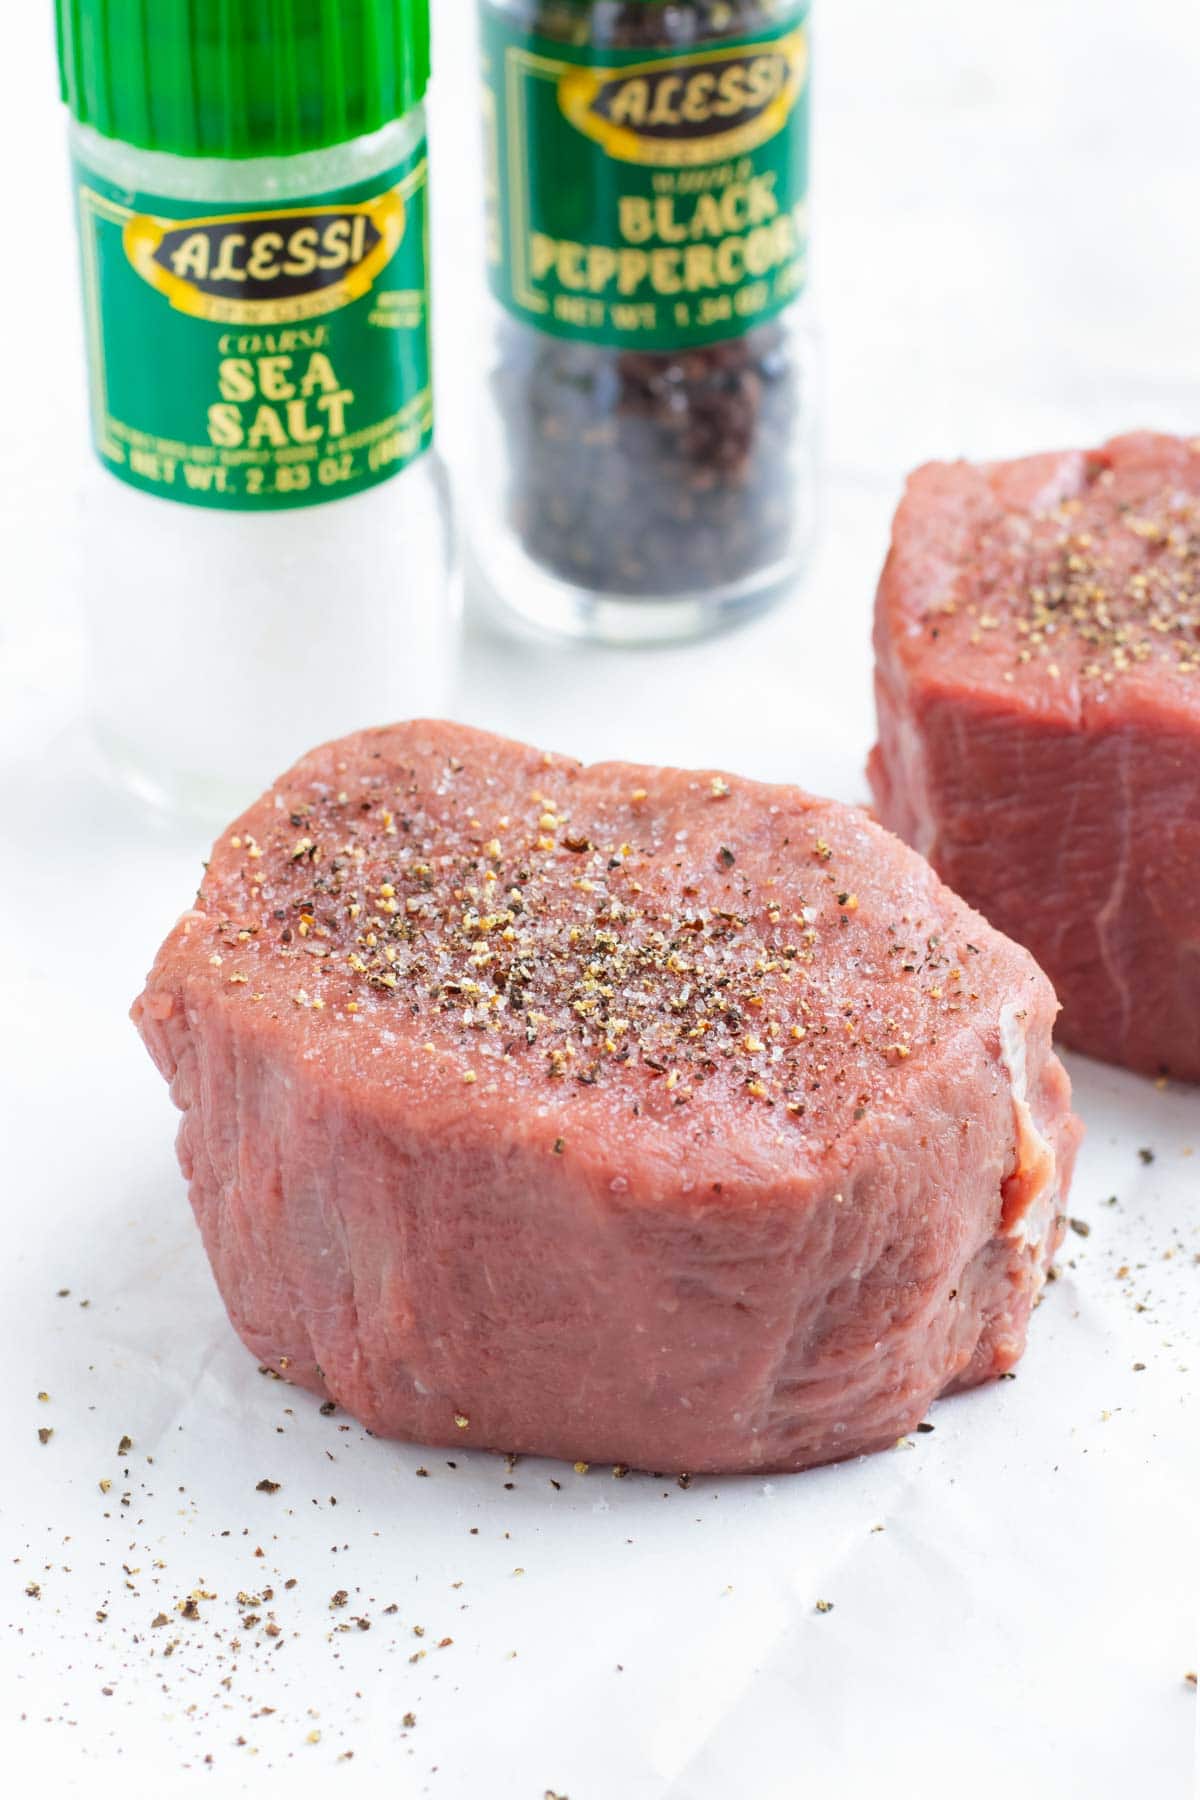 A two-inch thick grass-fed filet mignon steak with a salt and pepper shaker in the back ground.